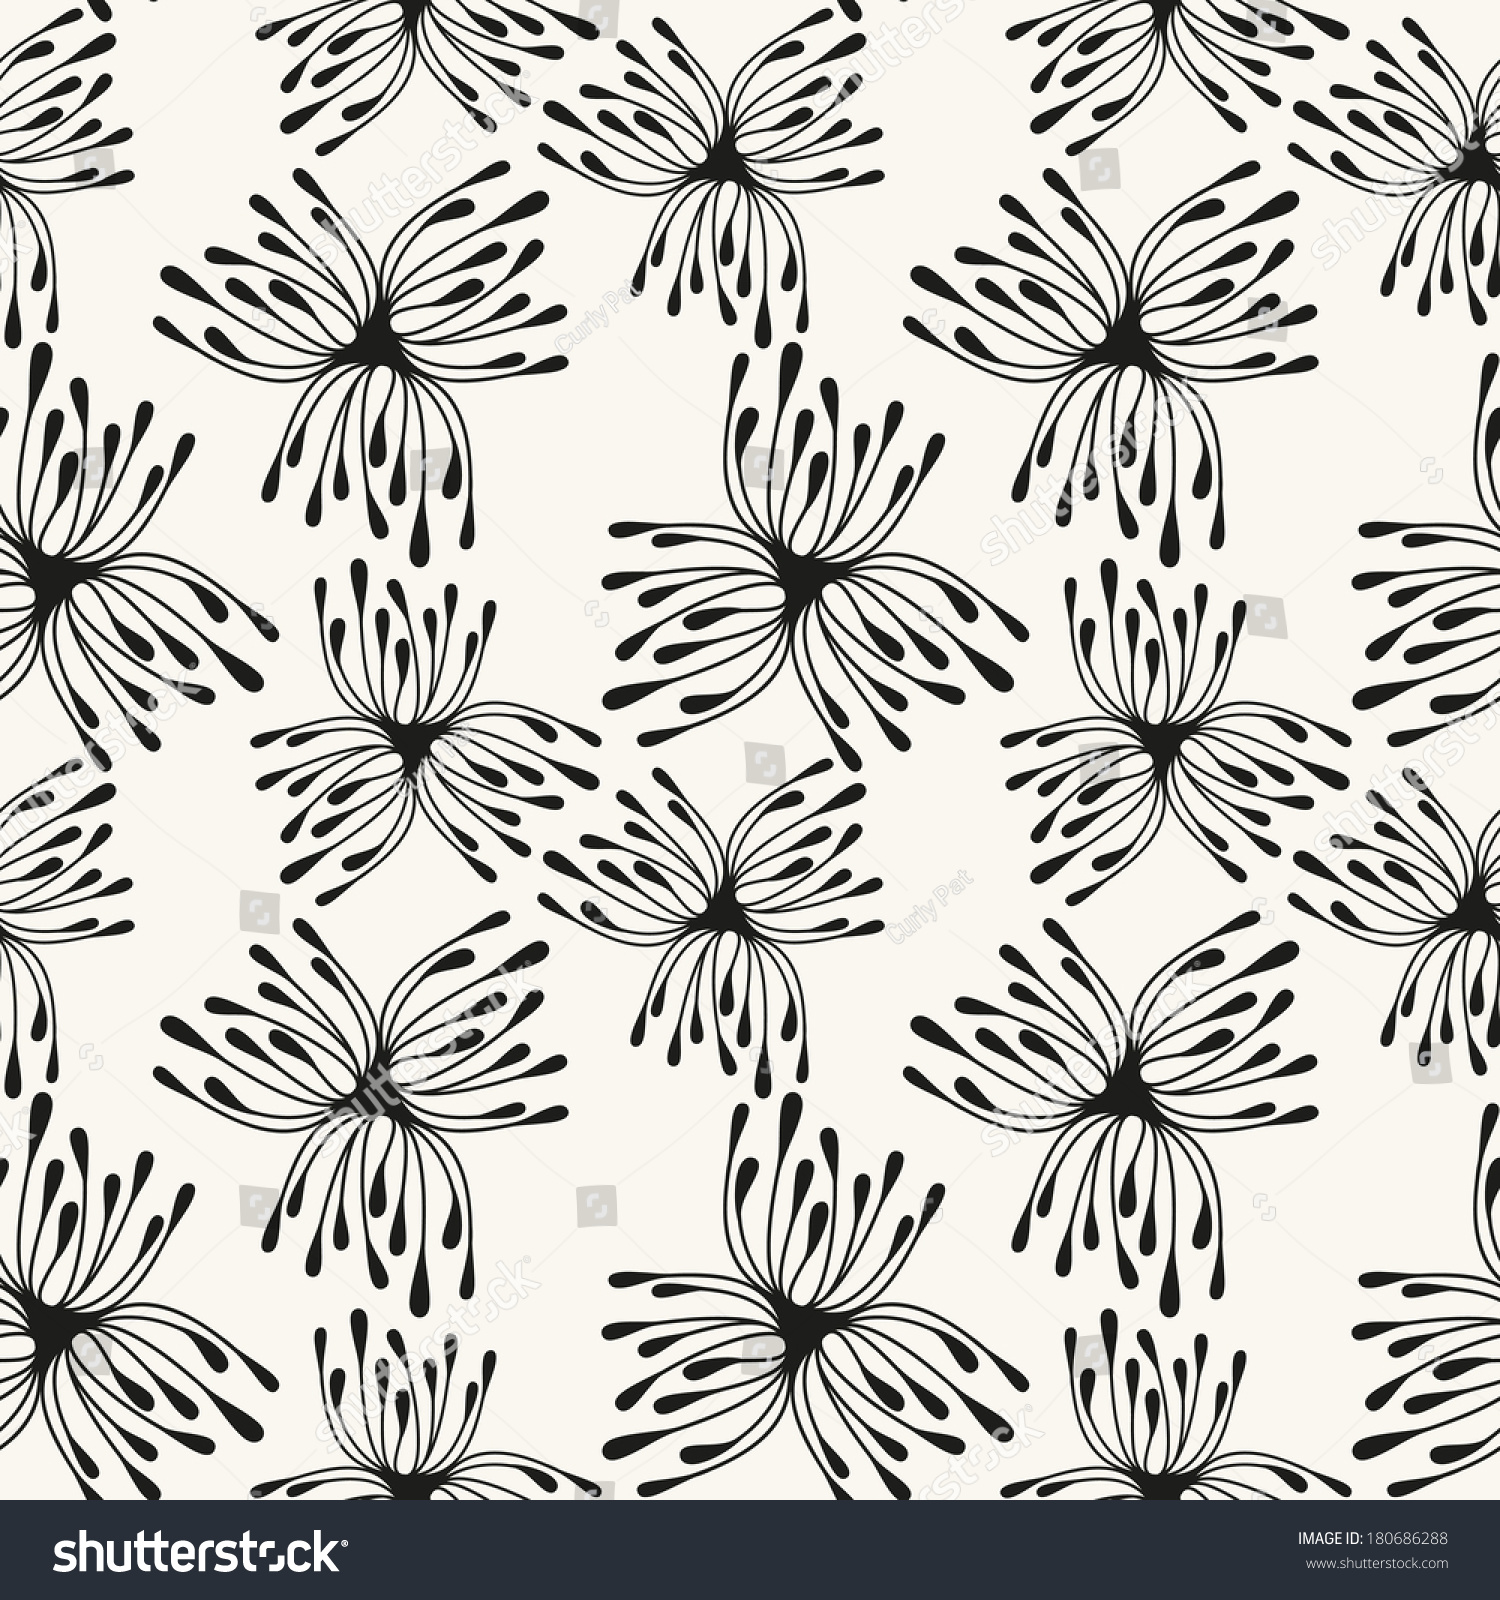 Vector seamless pattern with spots. Modern repeating texture. Fancy print with stylized flowers #180686288